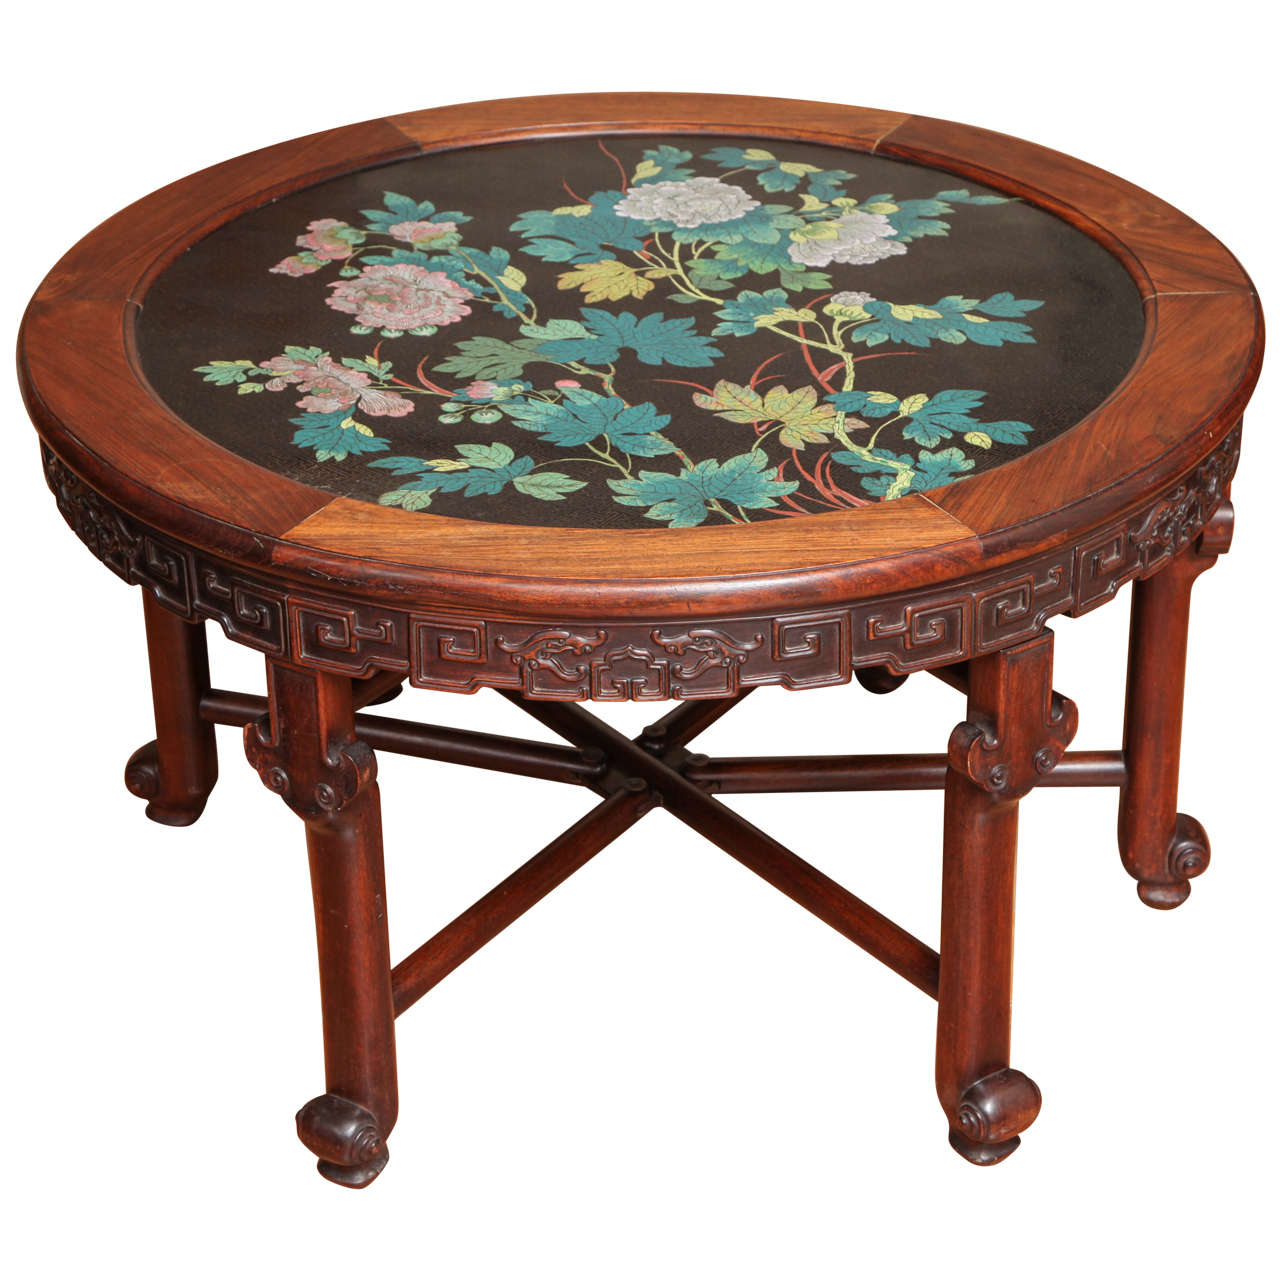 Antique Chinese Carved Rosewood and Floral Enamel Cloisonné Circular Table For Sale